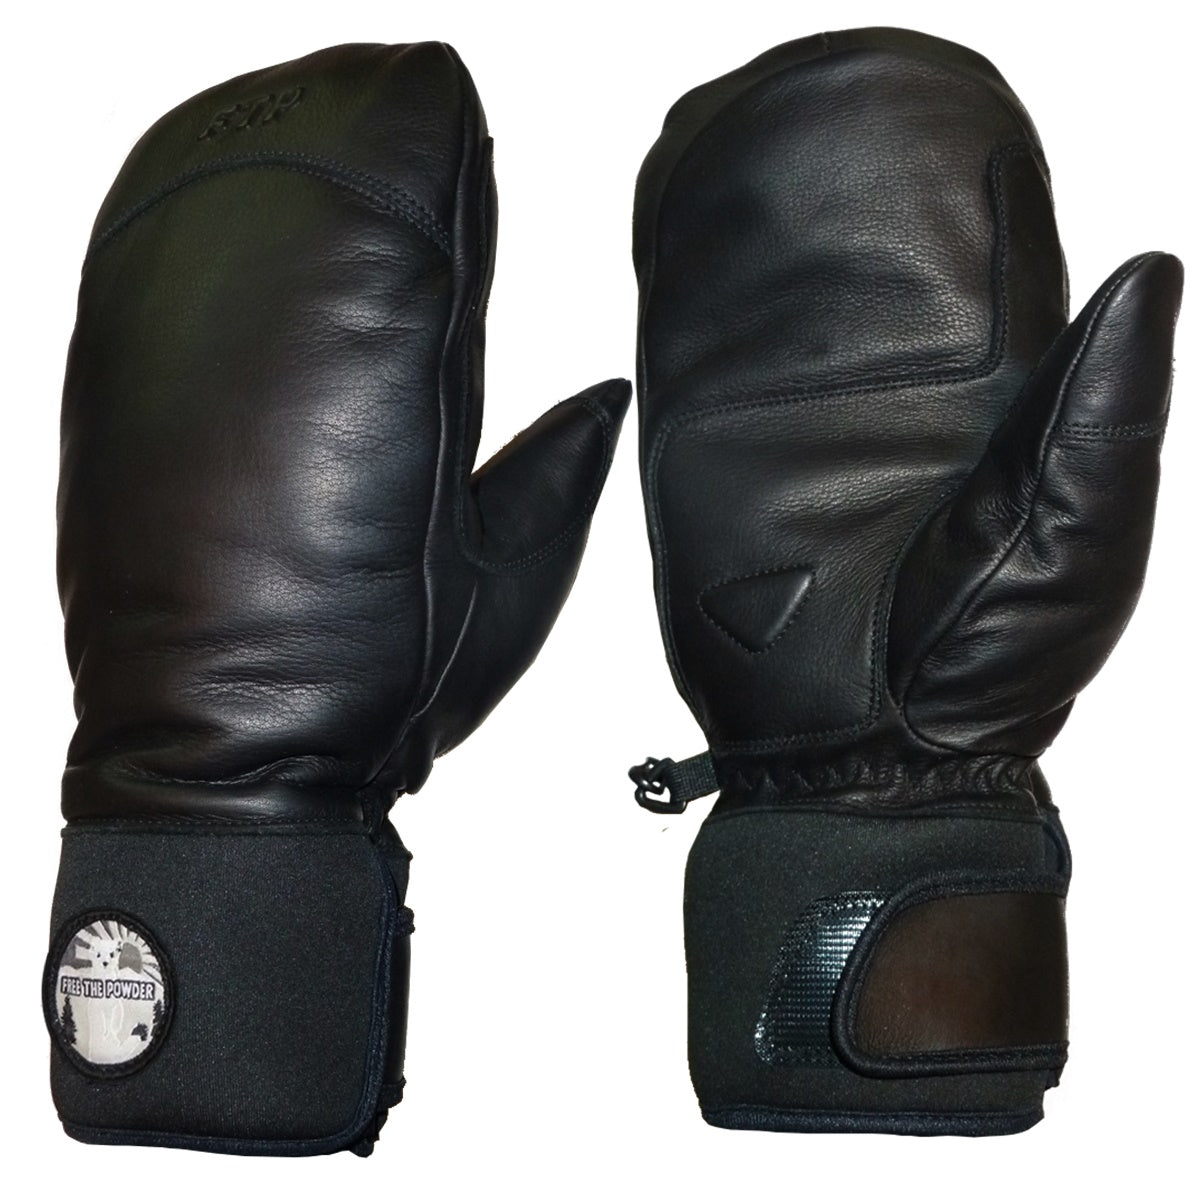 Baldy Mittens by Free the Powder all leather black